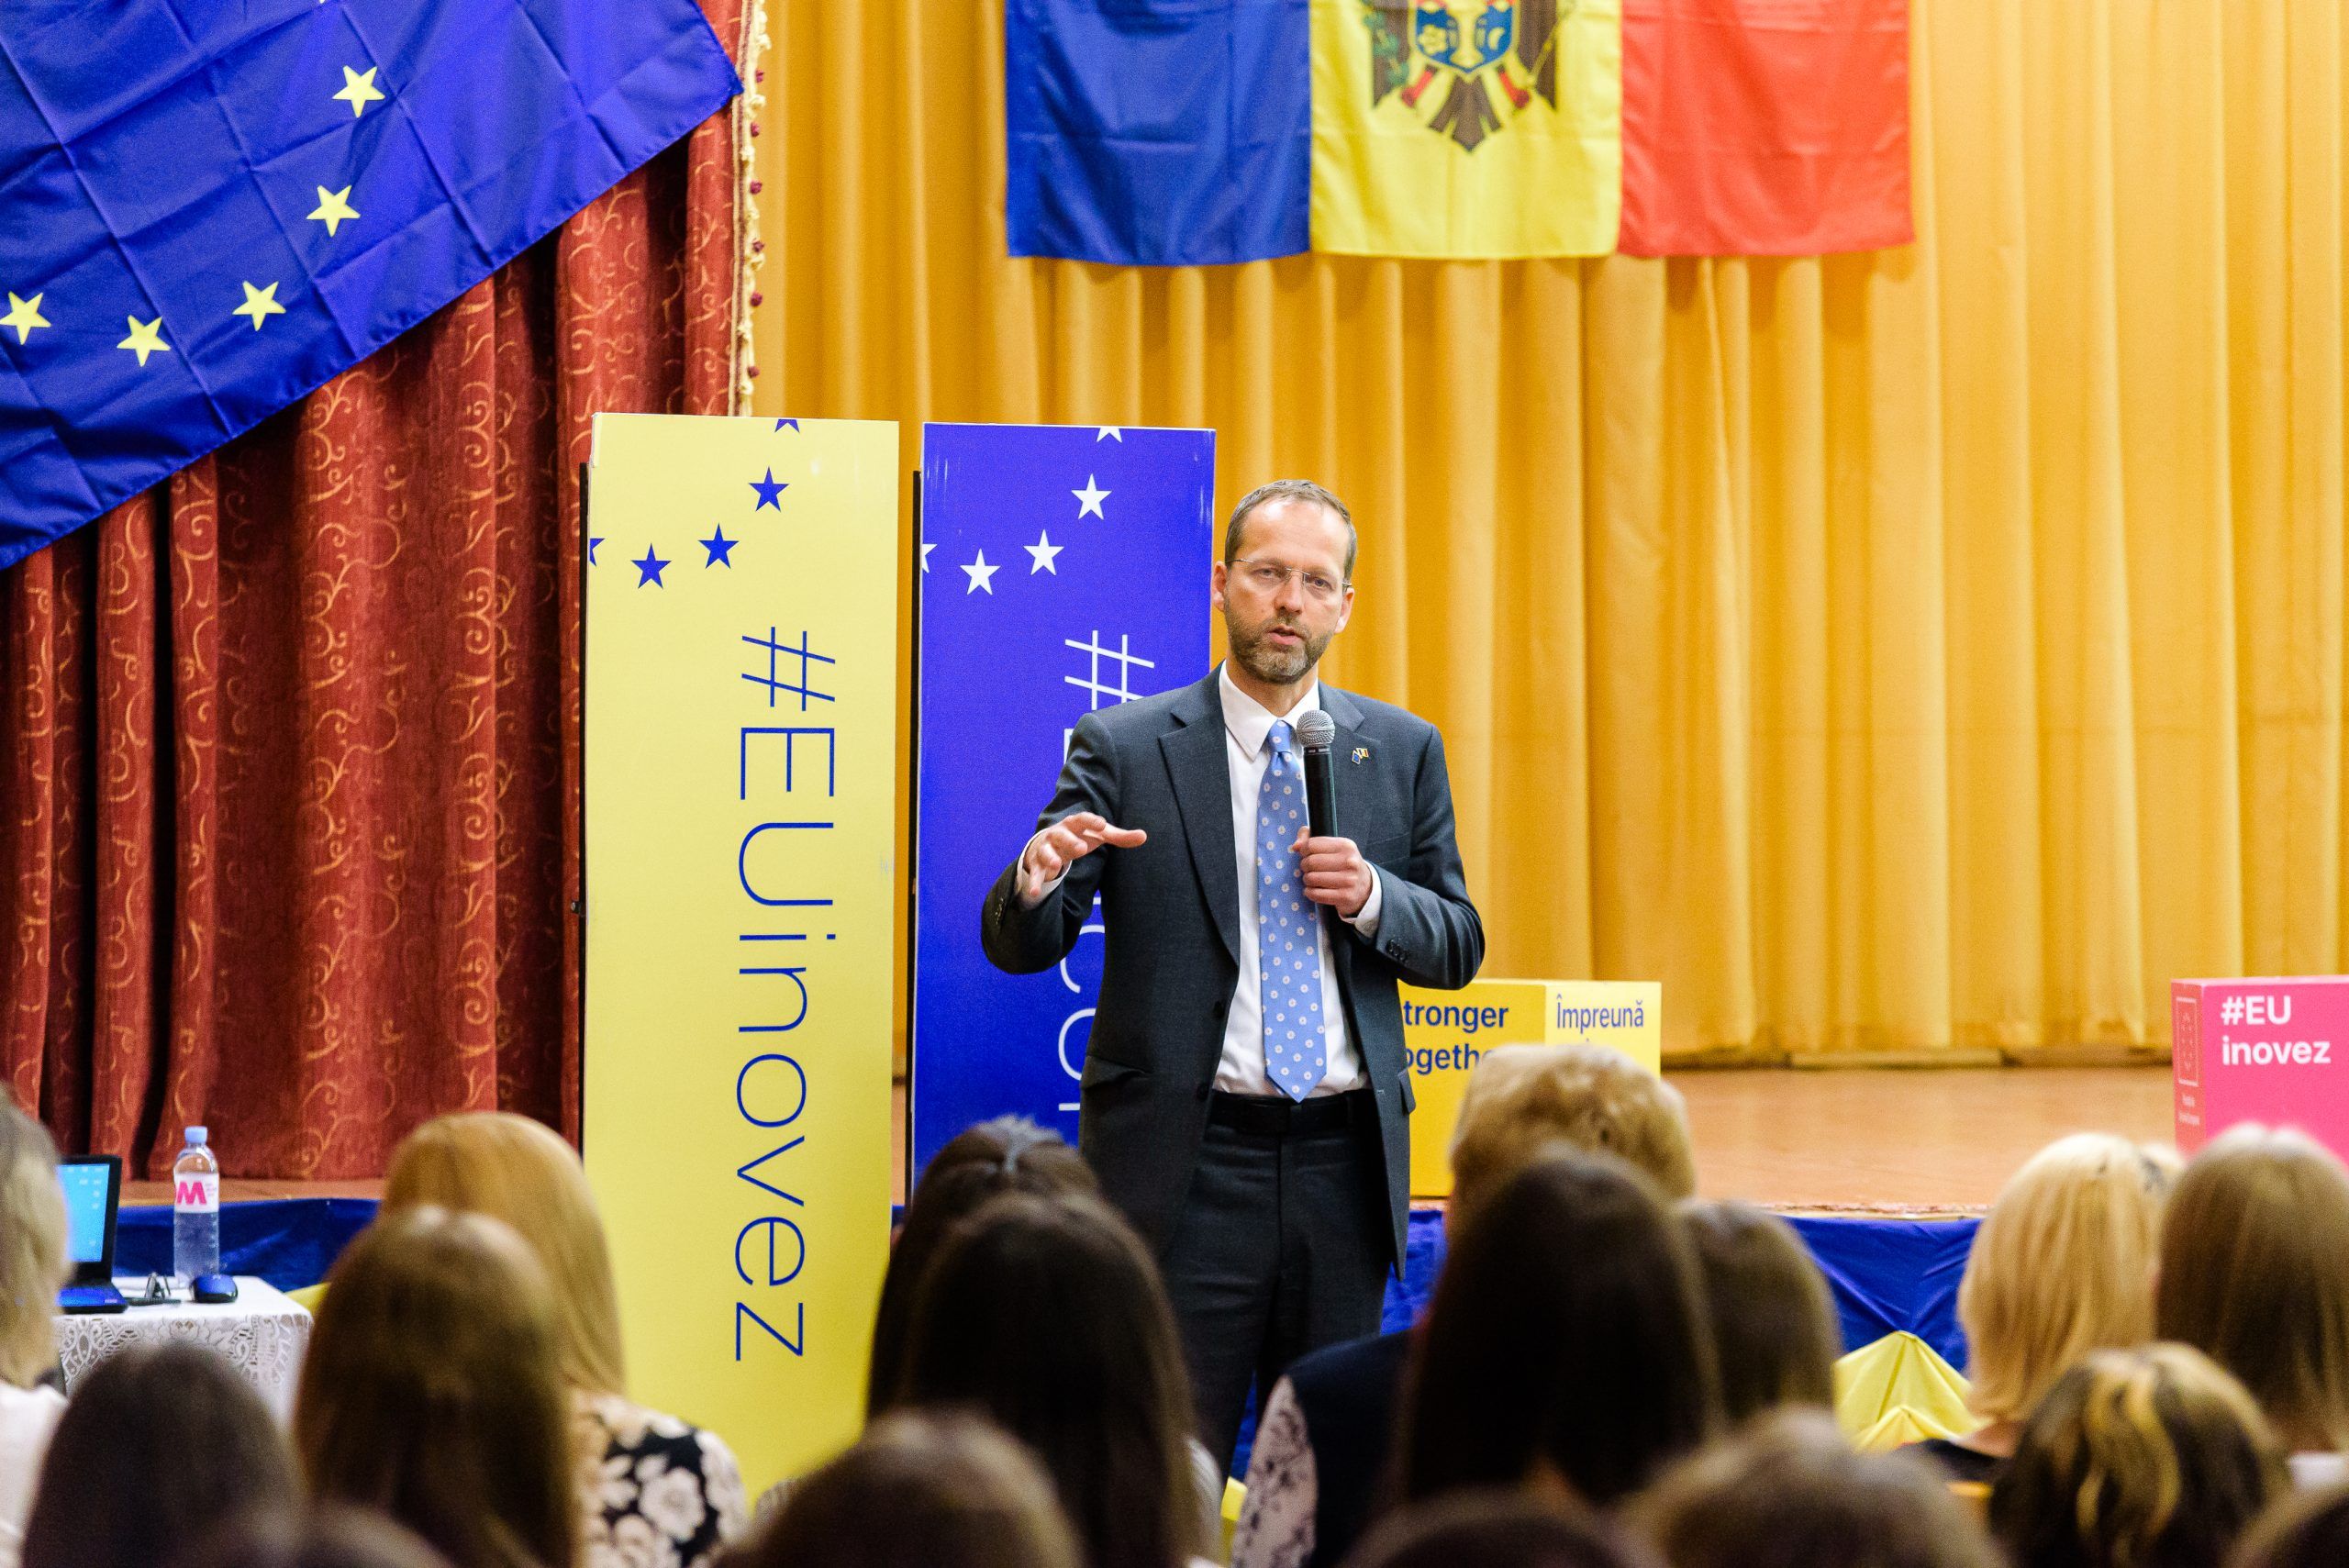 The EU Talks event series continues! On April 30, 2024, we discussed the European future of Moldova with the pupils of "Vasile Alecsandri" High School in Chisinau.